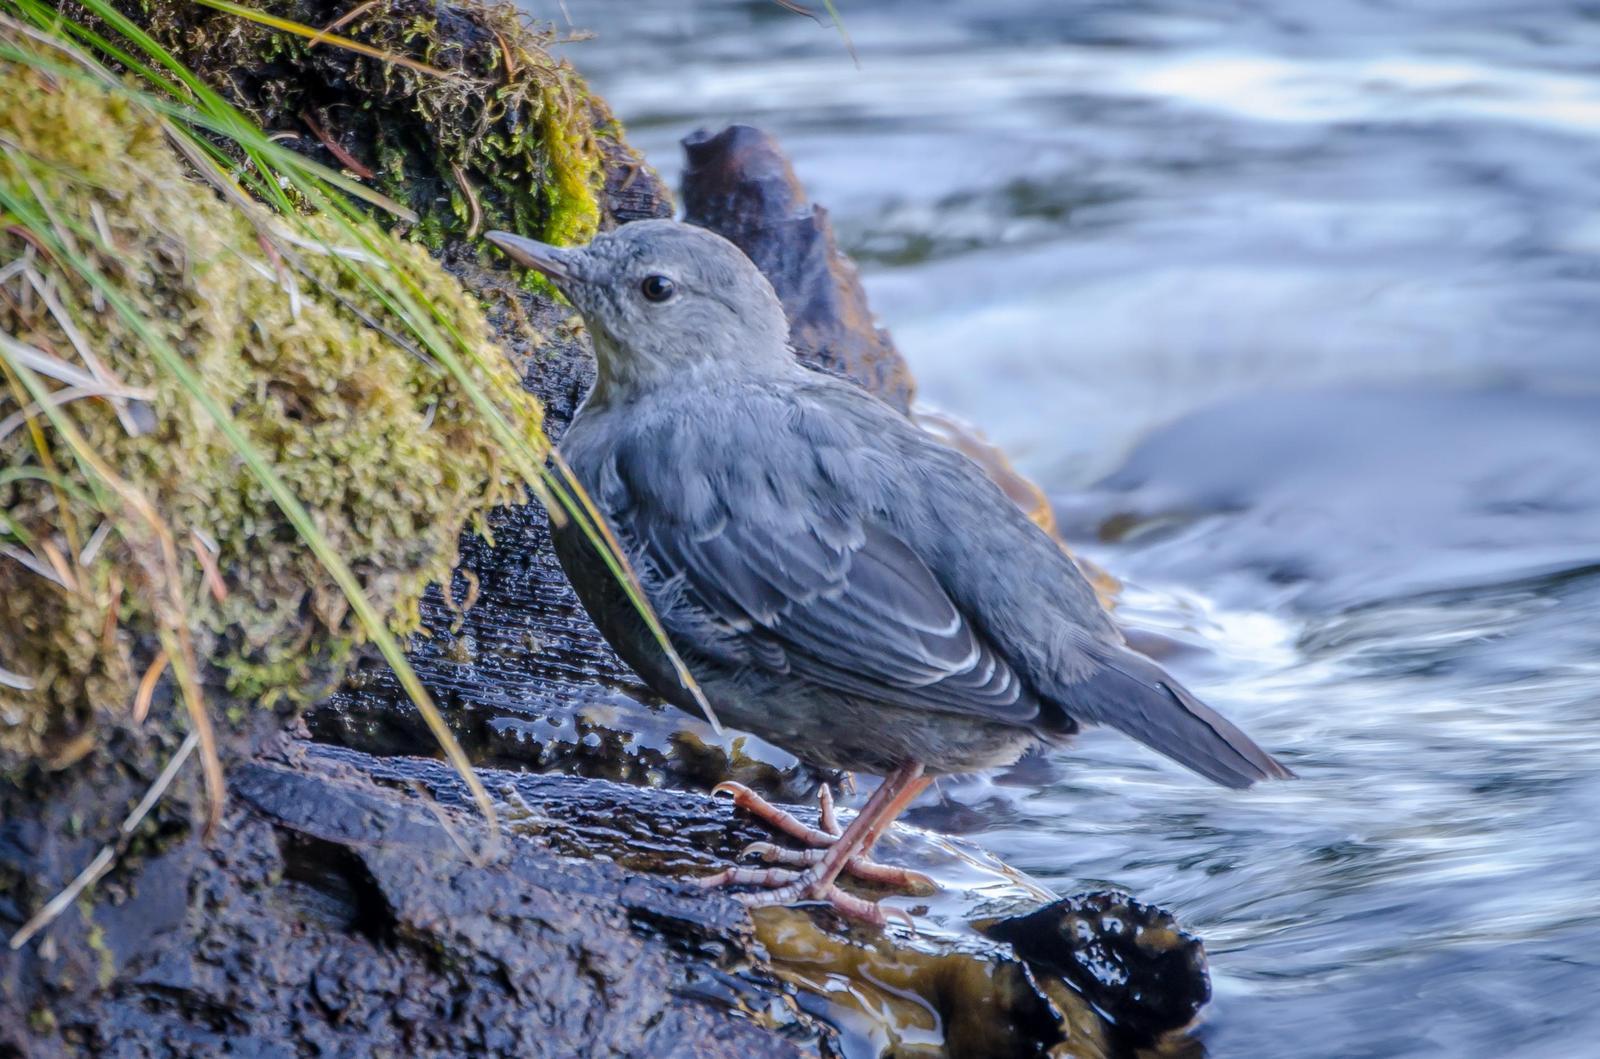 American Dipper Photo by Scott Yerges